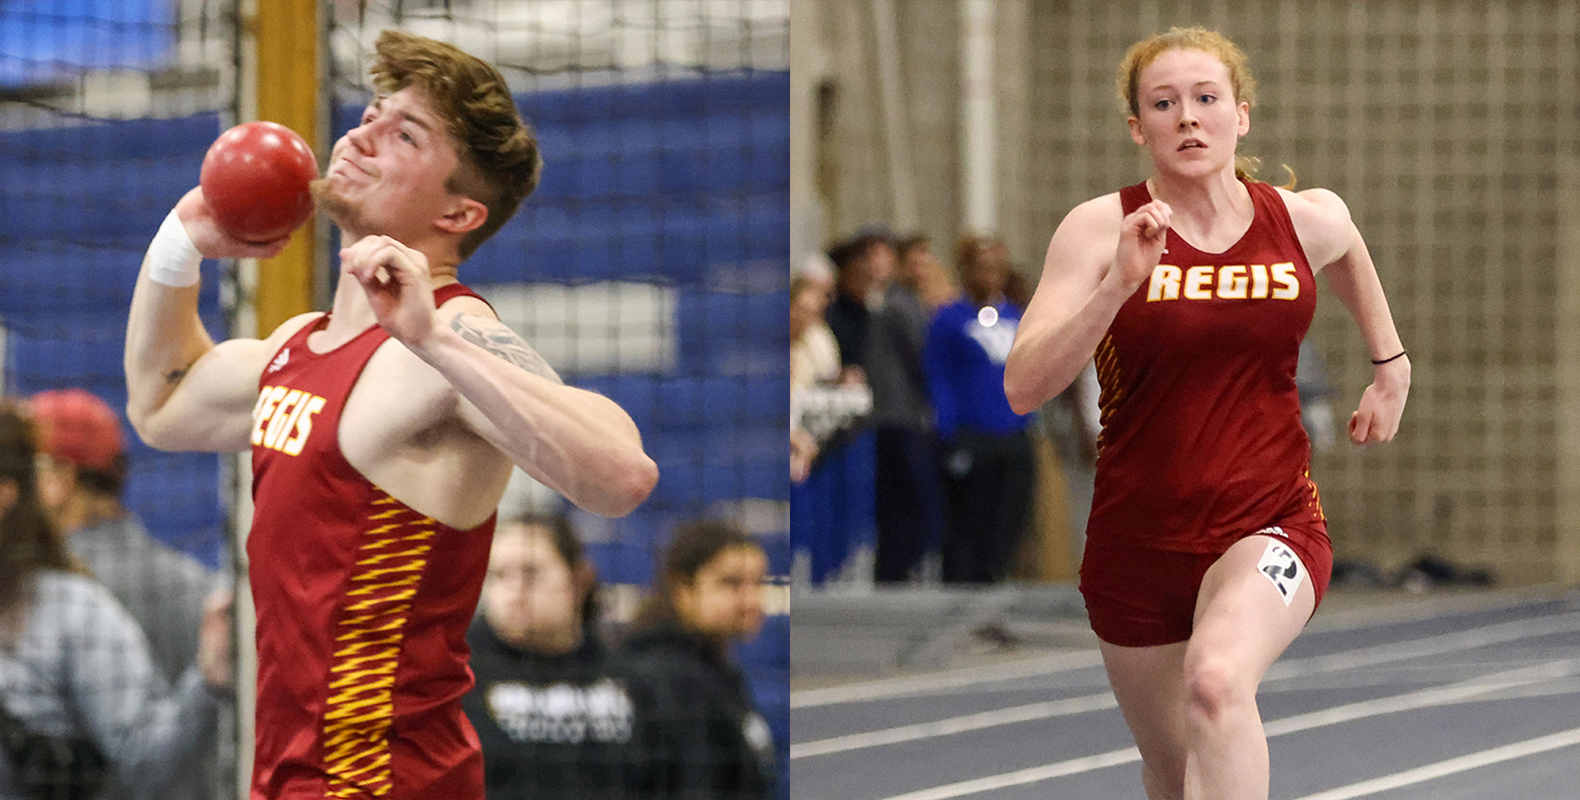 Thuotte, Curran Participate in Multi-Event Competitions at Tufts